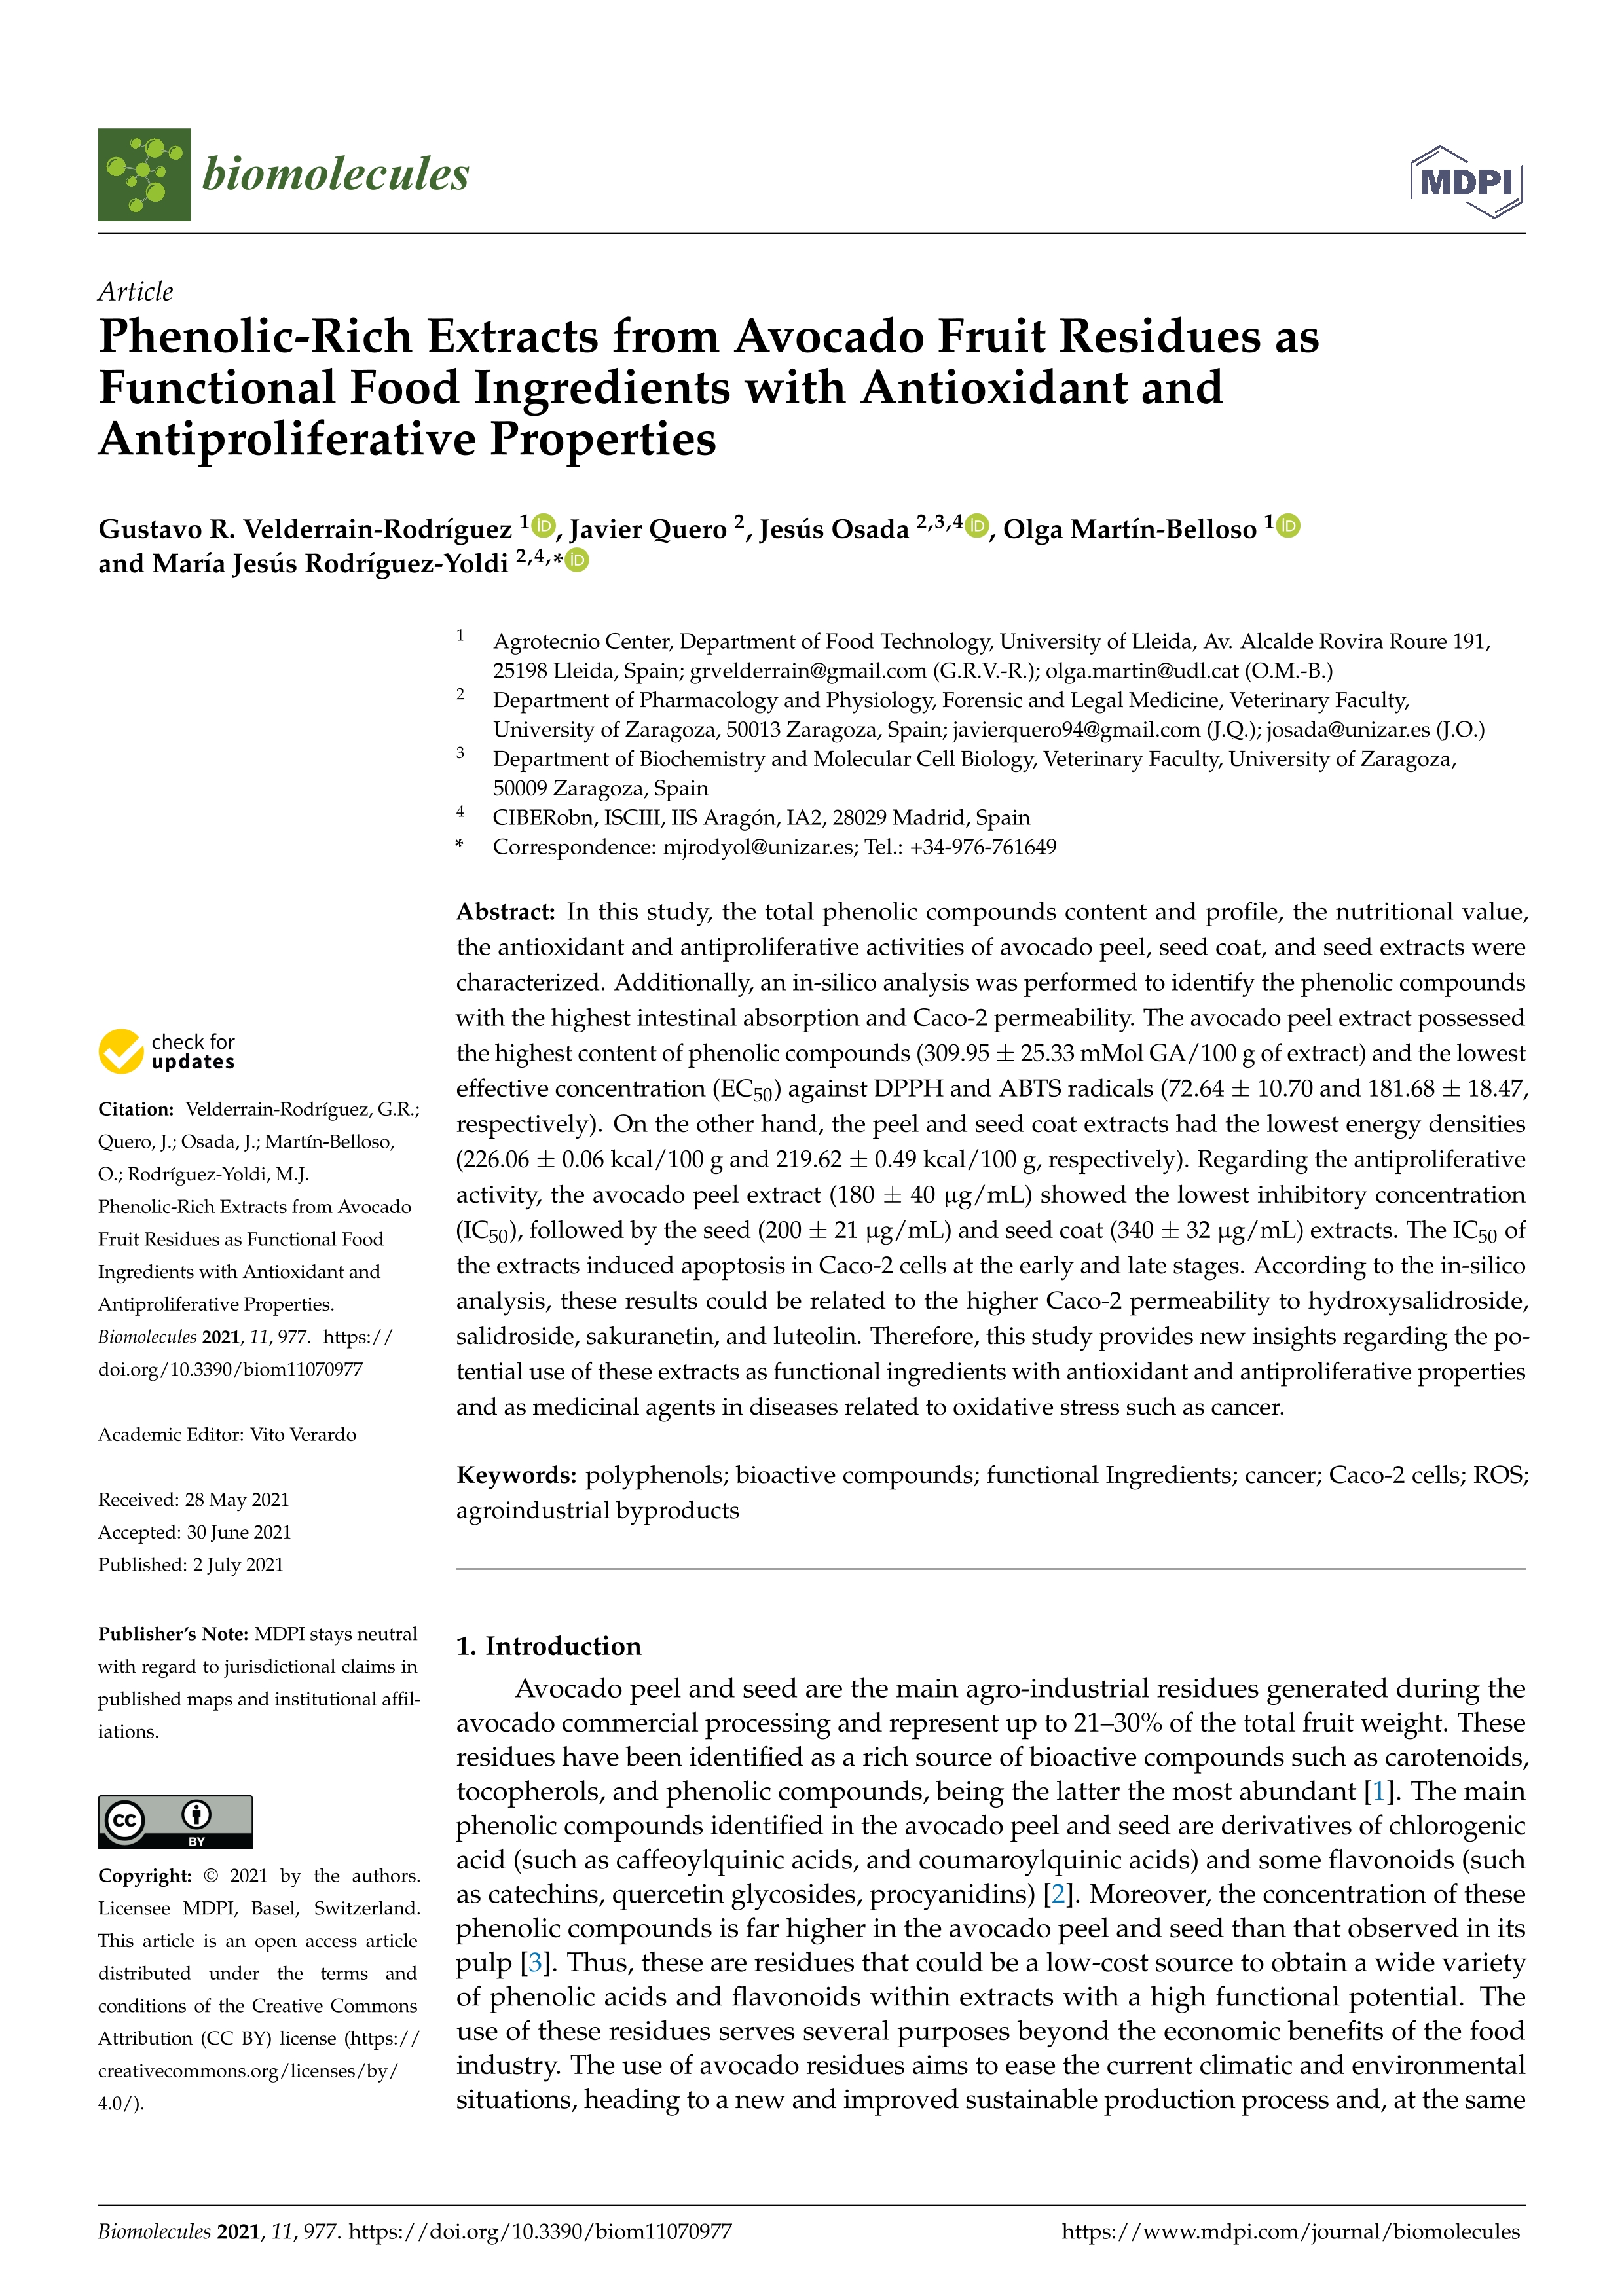 Phenolic-rich extracts from avocado fruit residues as functional food ingredients with antioxidant and antiproliferative properties